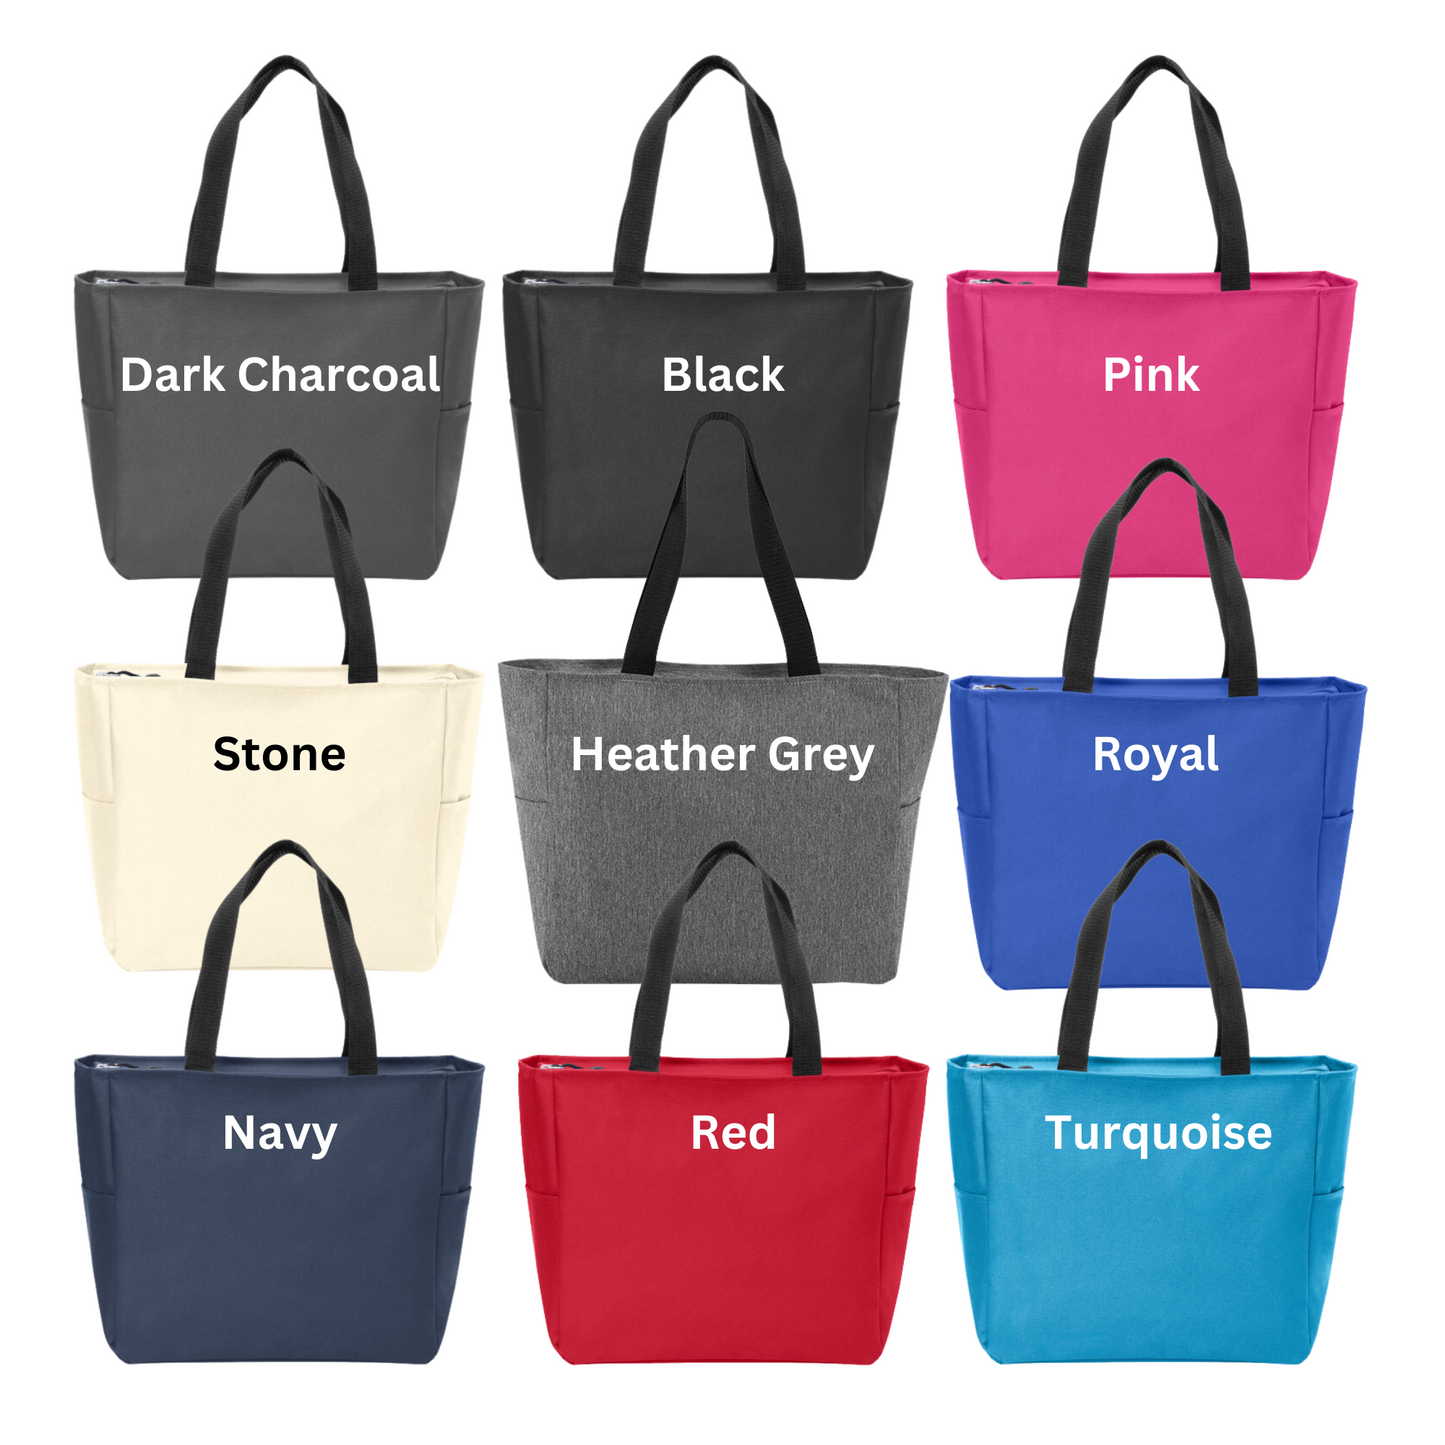 Monogrammed Embroidered Canvas Tote Bag